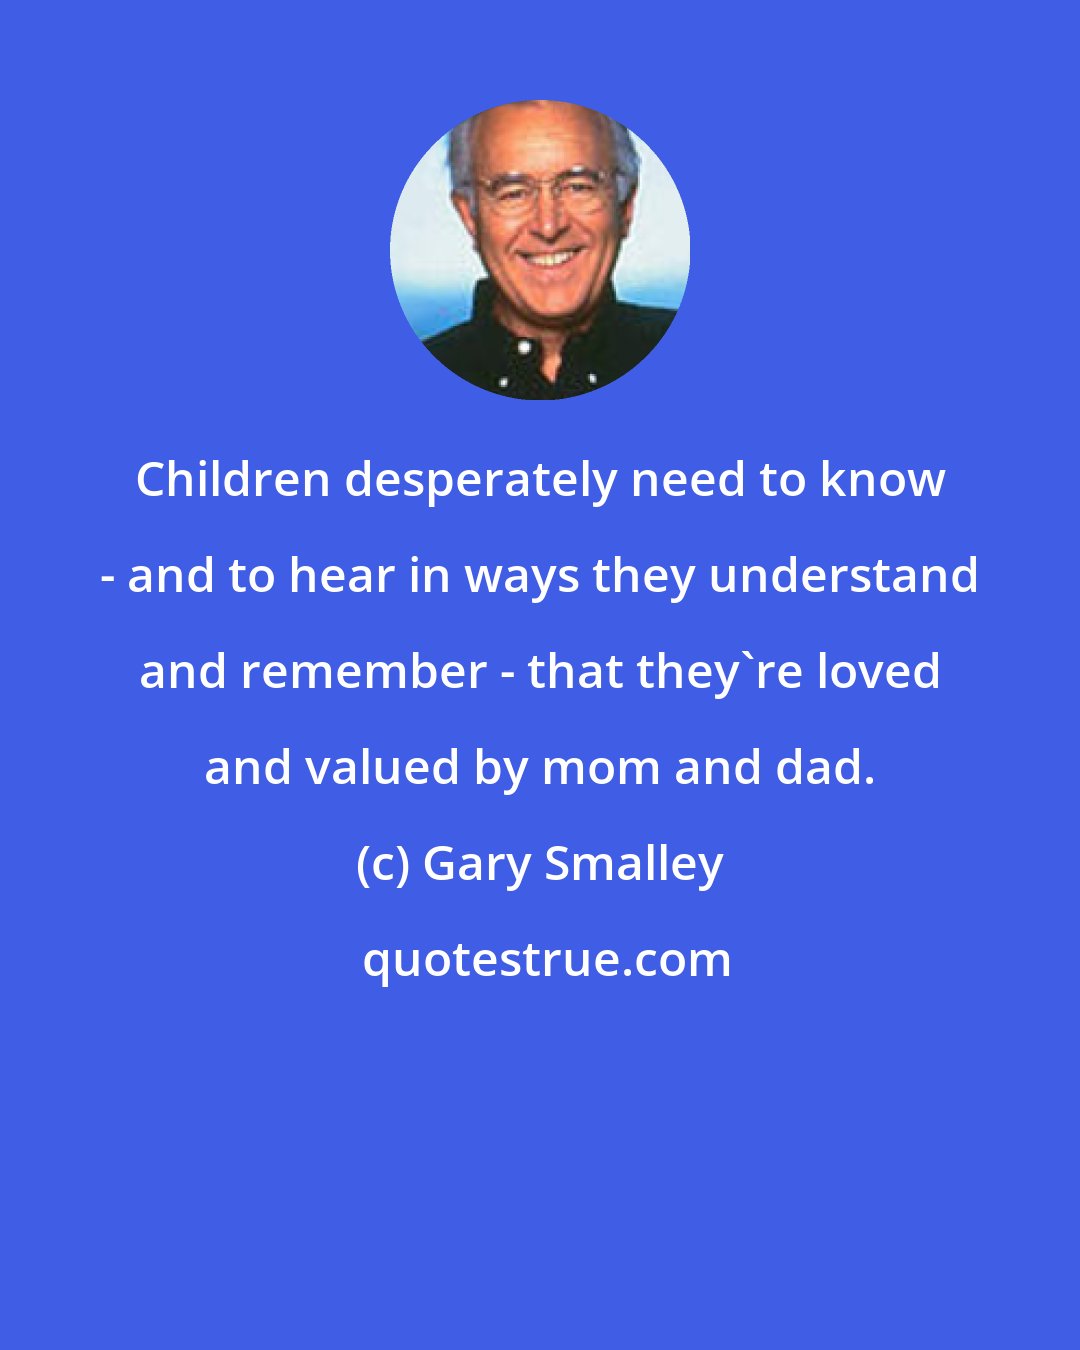 Gary Smalley: Children desperately need to know - and to hear in ways they understand and remember - that they're loved and valued by mom and dad.